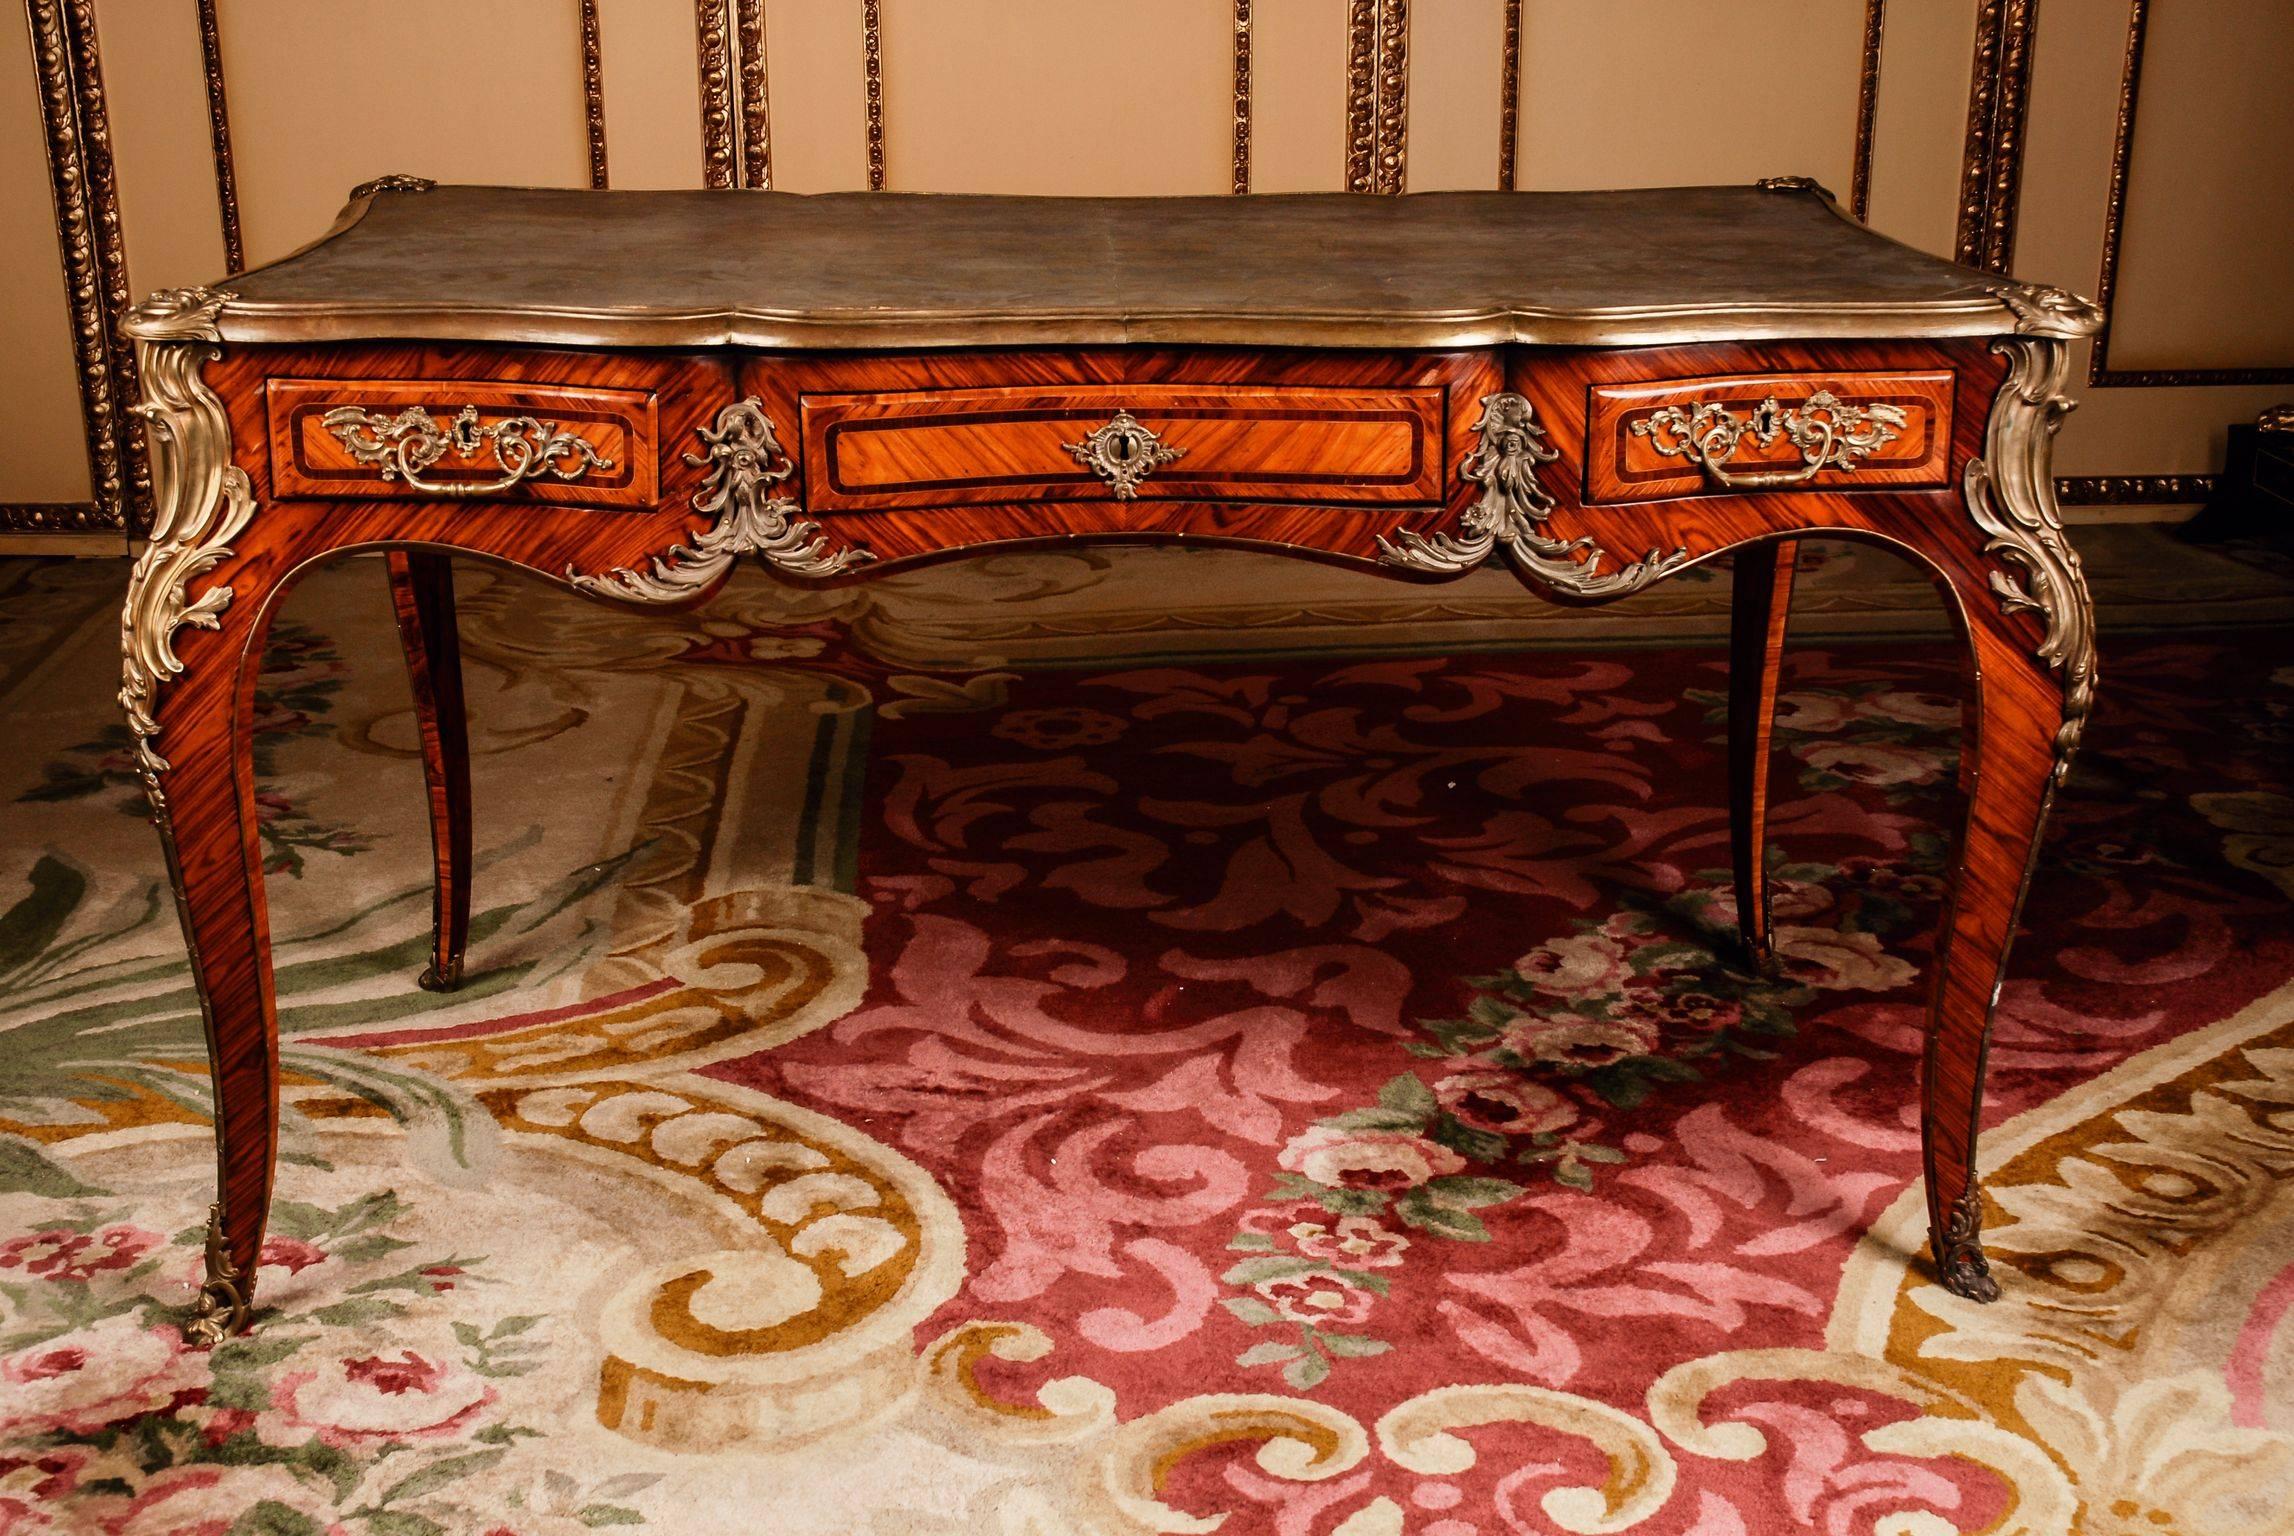 Bureau plat in the style of the Louis XV Napoleon III Paris, circa 1850-1880.
In Bois-Satiné veneer, all-round full-length mirror veneer with seed beads. With very finely chiselled, highly decorative, restrained fire-gilt bronze fittings. Solid